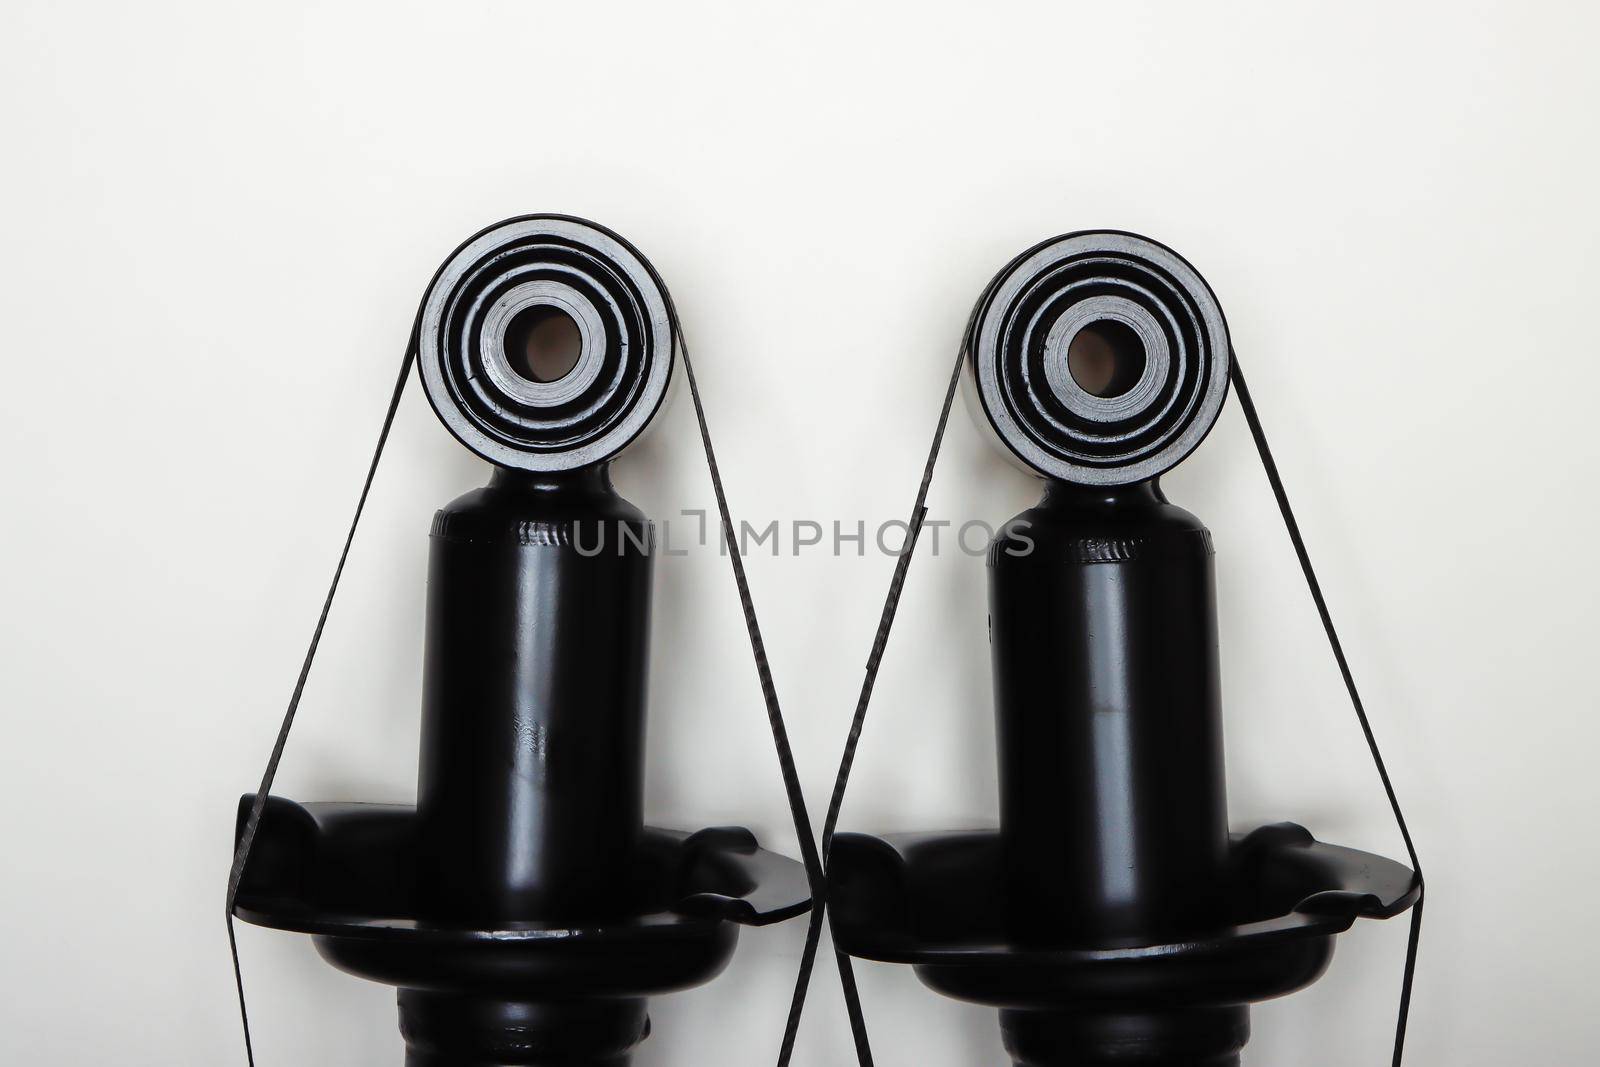 The upper mountings of the shock absorbers for the machine lie on a flat surface. A set of spare parts for the repair of the chassis of the vehicle. Details on white background, copy space available